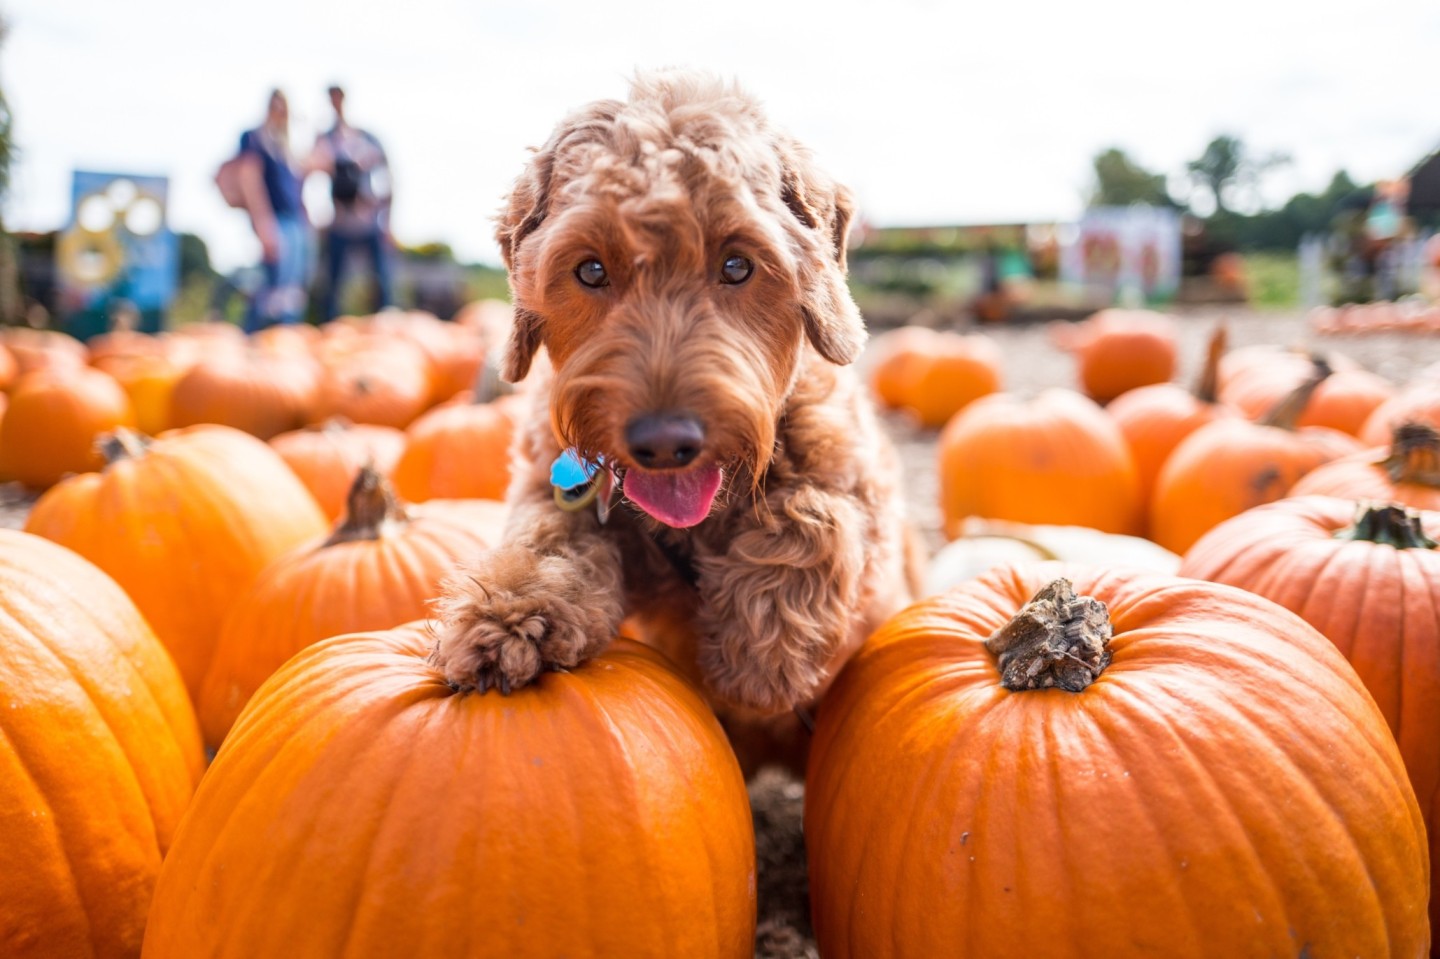 A dog playing in a field of pumpkins